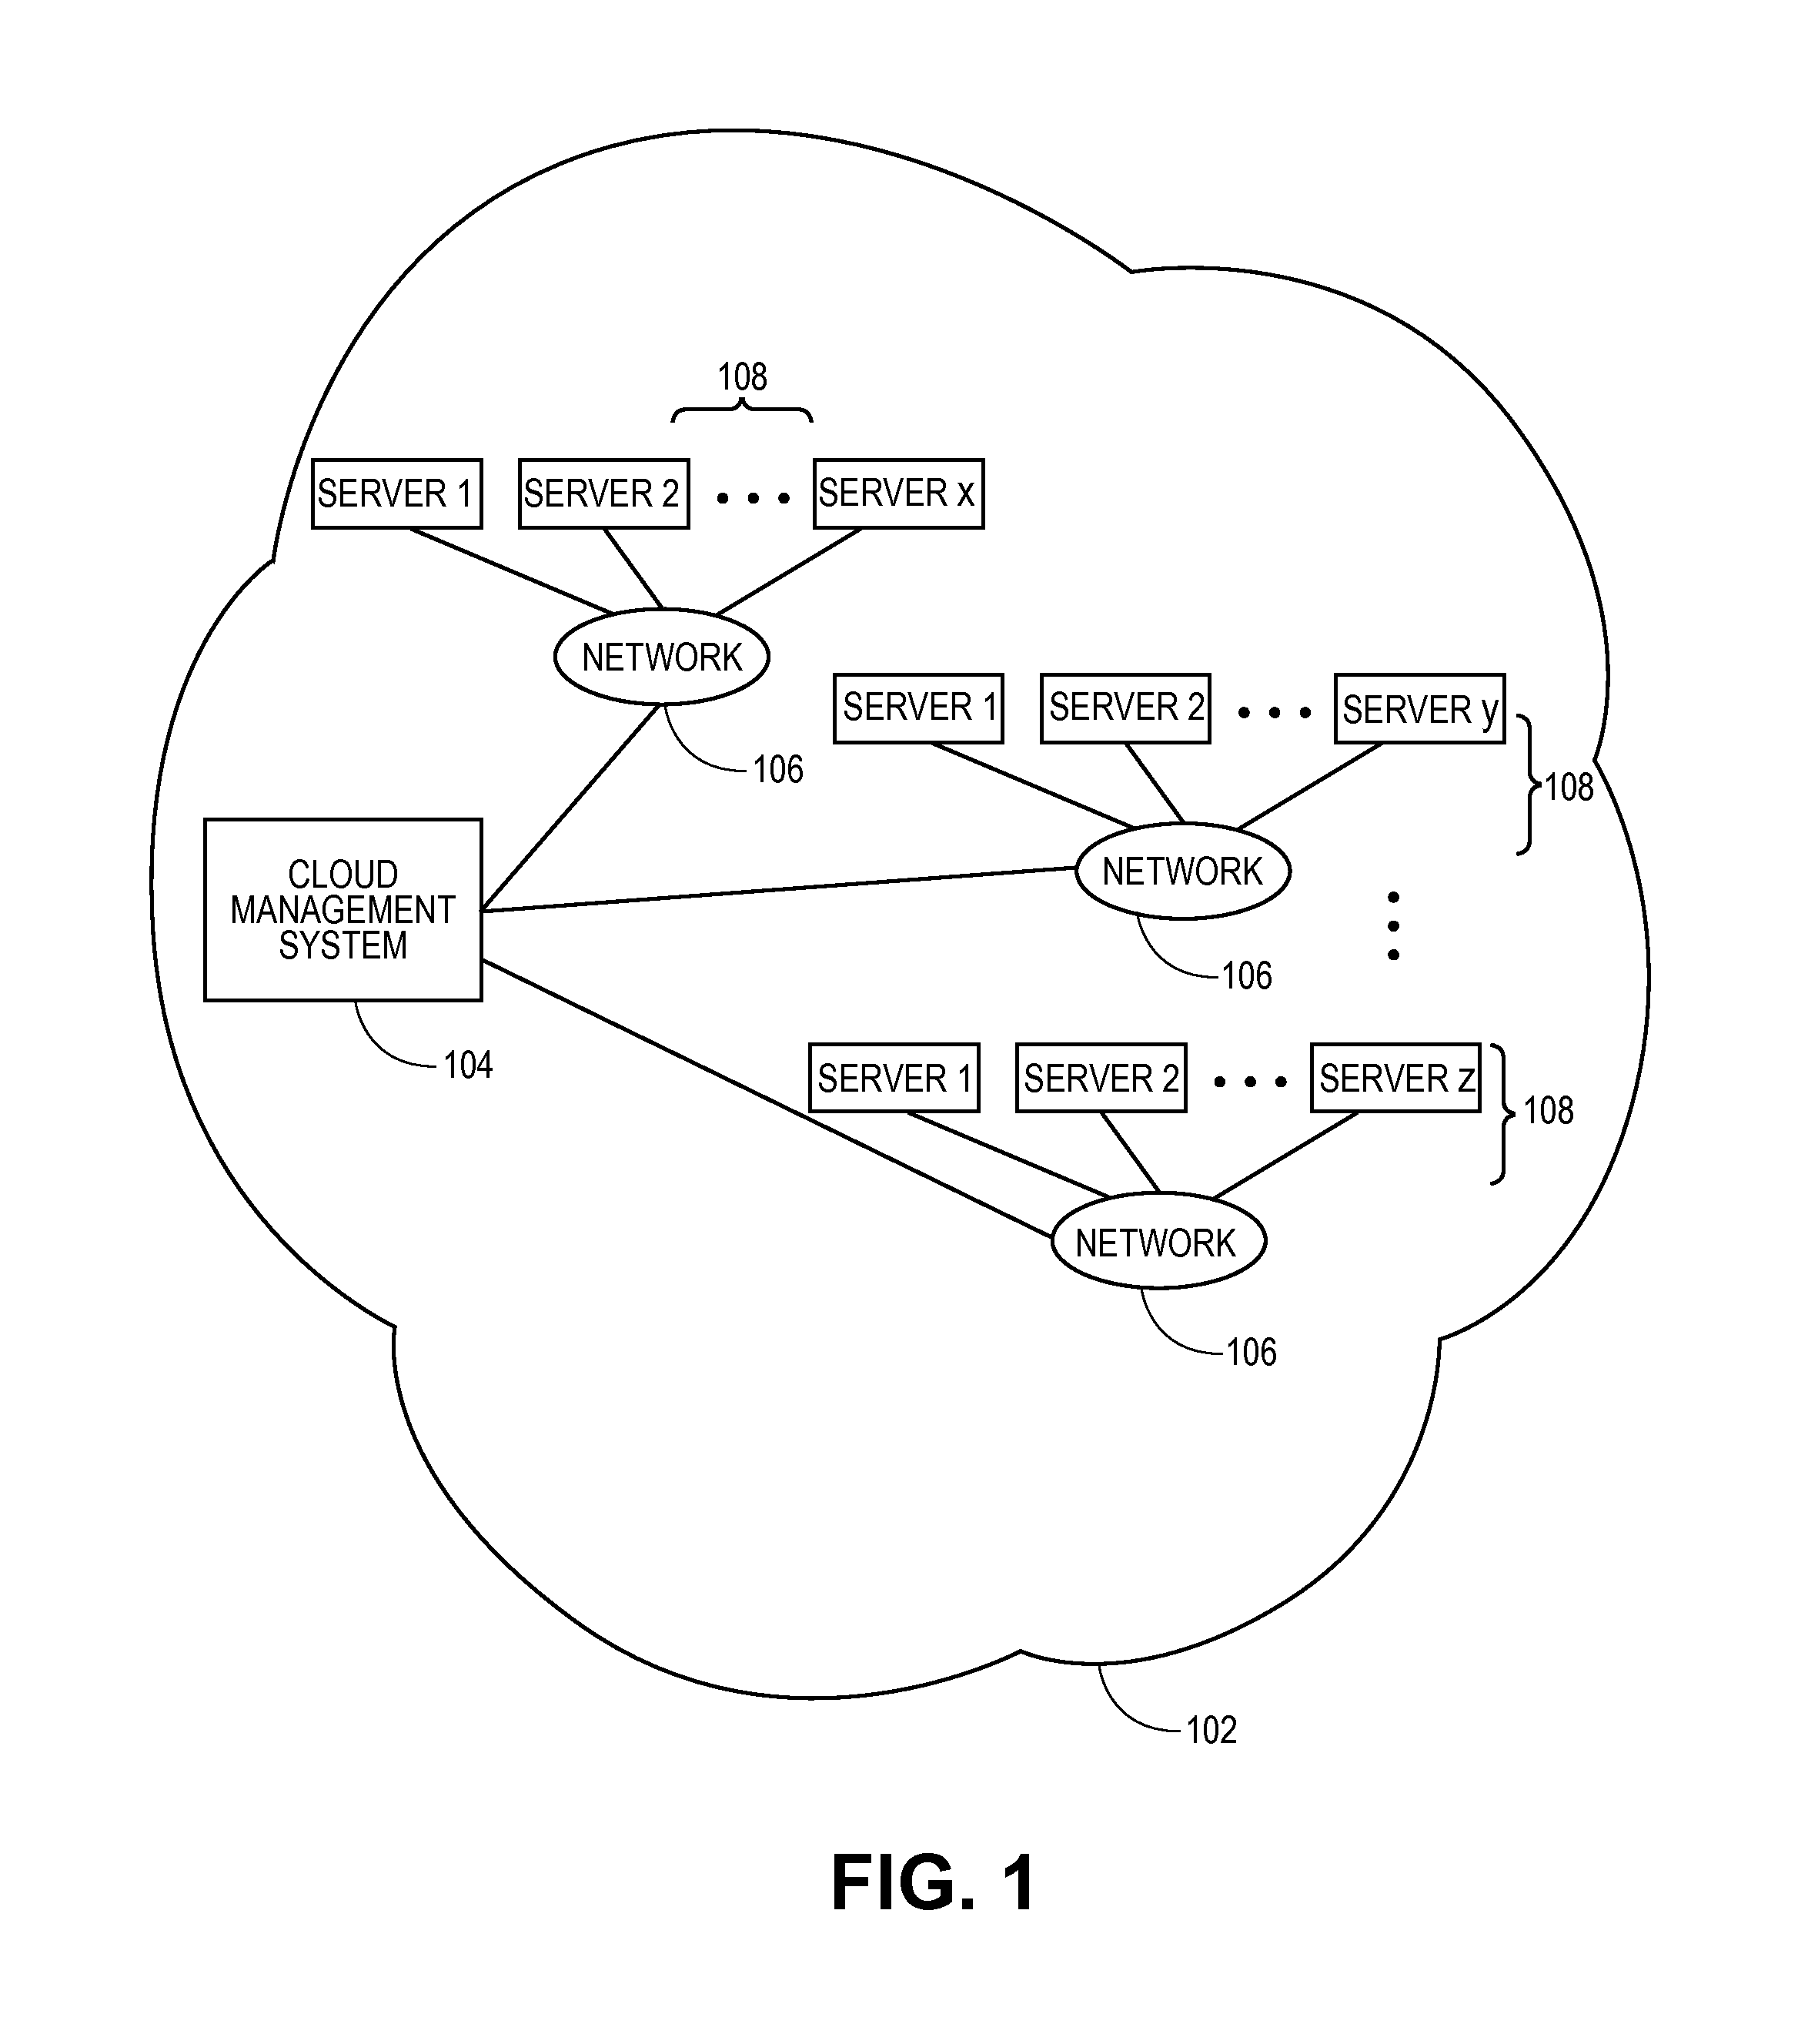 Methods and systems for monitoring cloud computing environments